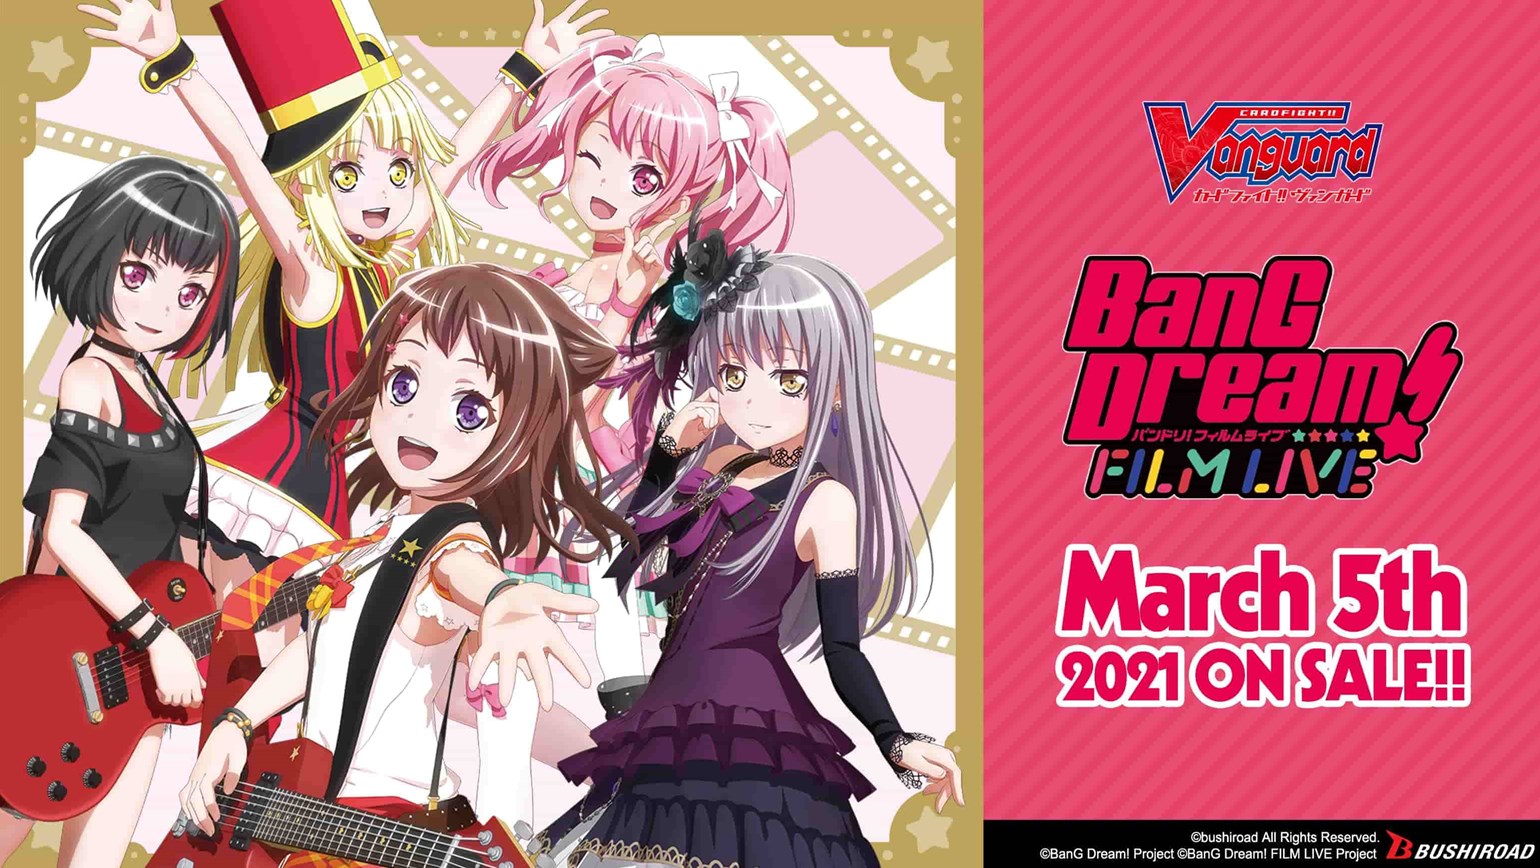 BanG Dream! Film Live Movie To Screen In Malaysia This August